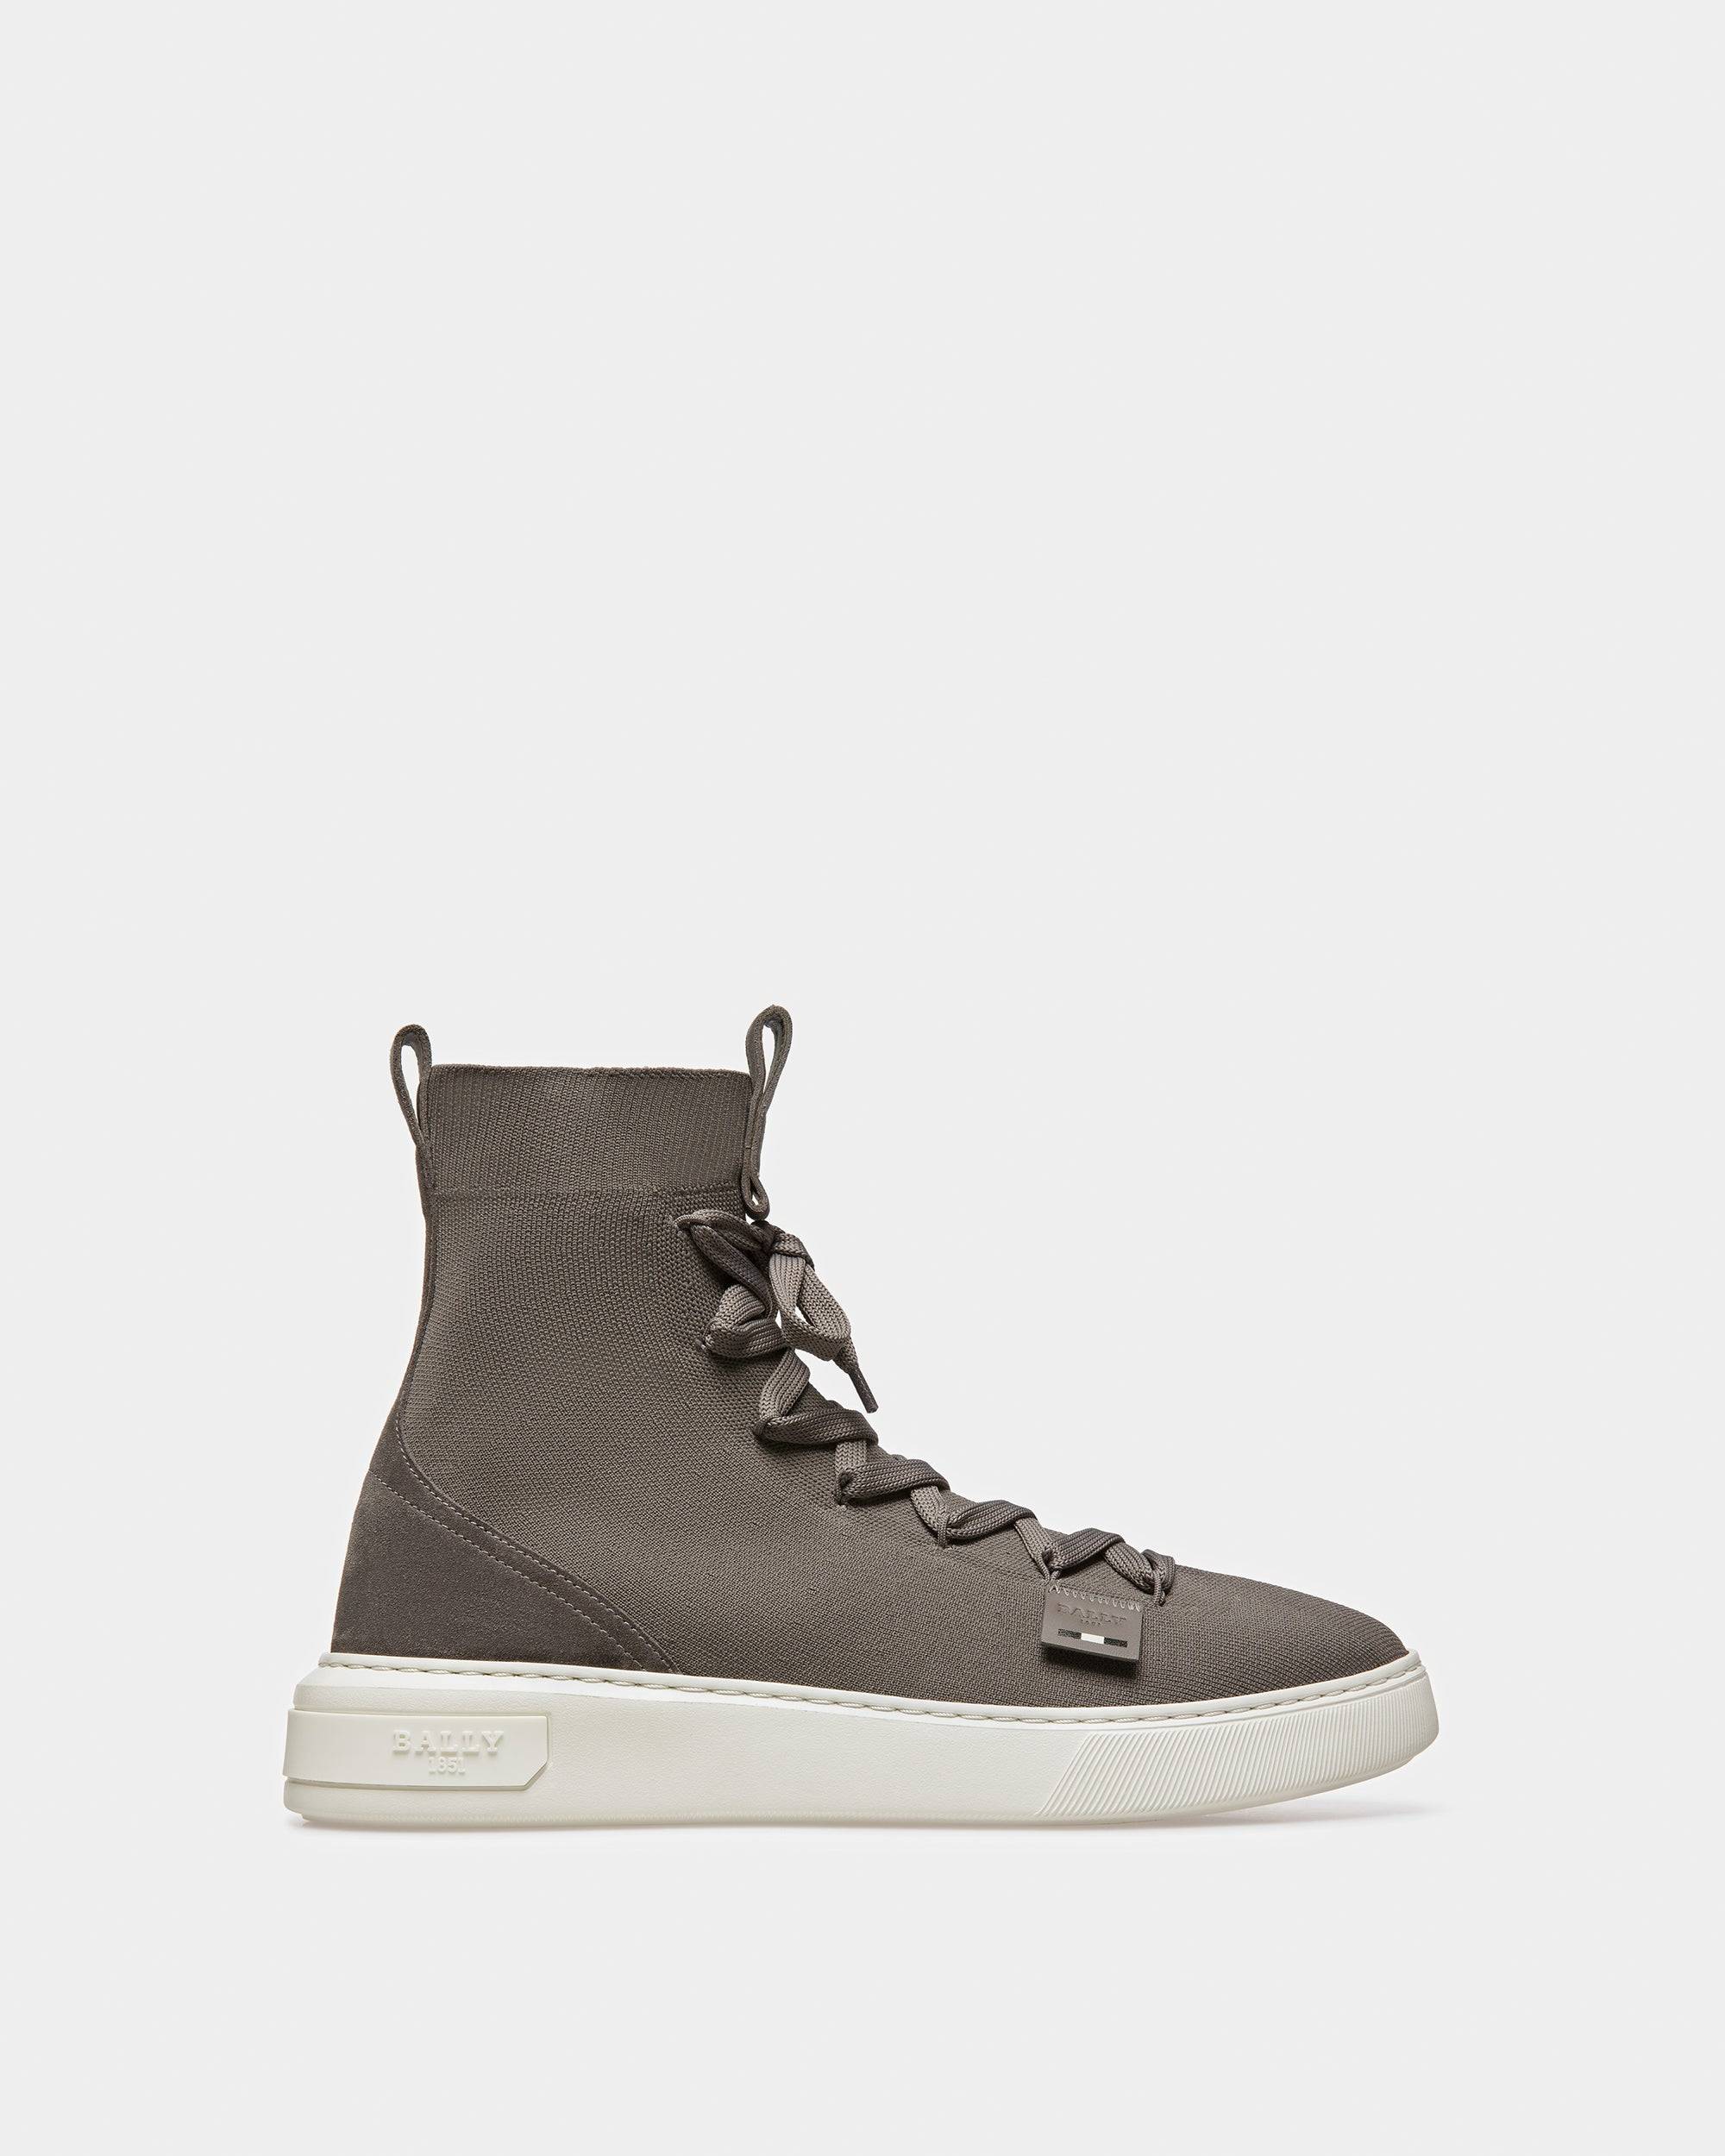 Mitys-T Sneaker In Pelle Antracite - Bally - 01